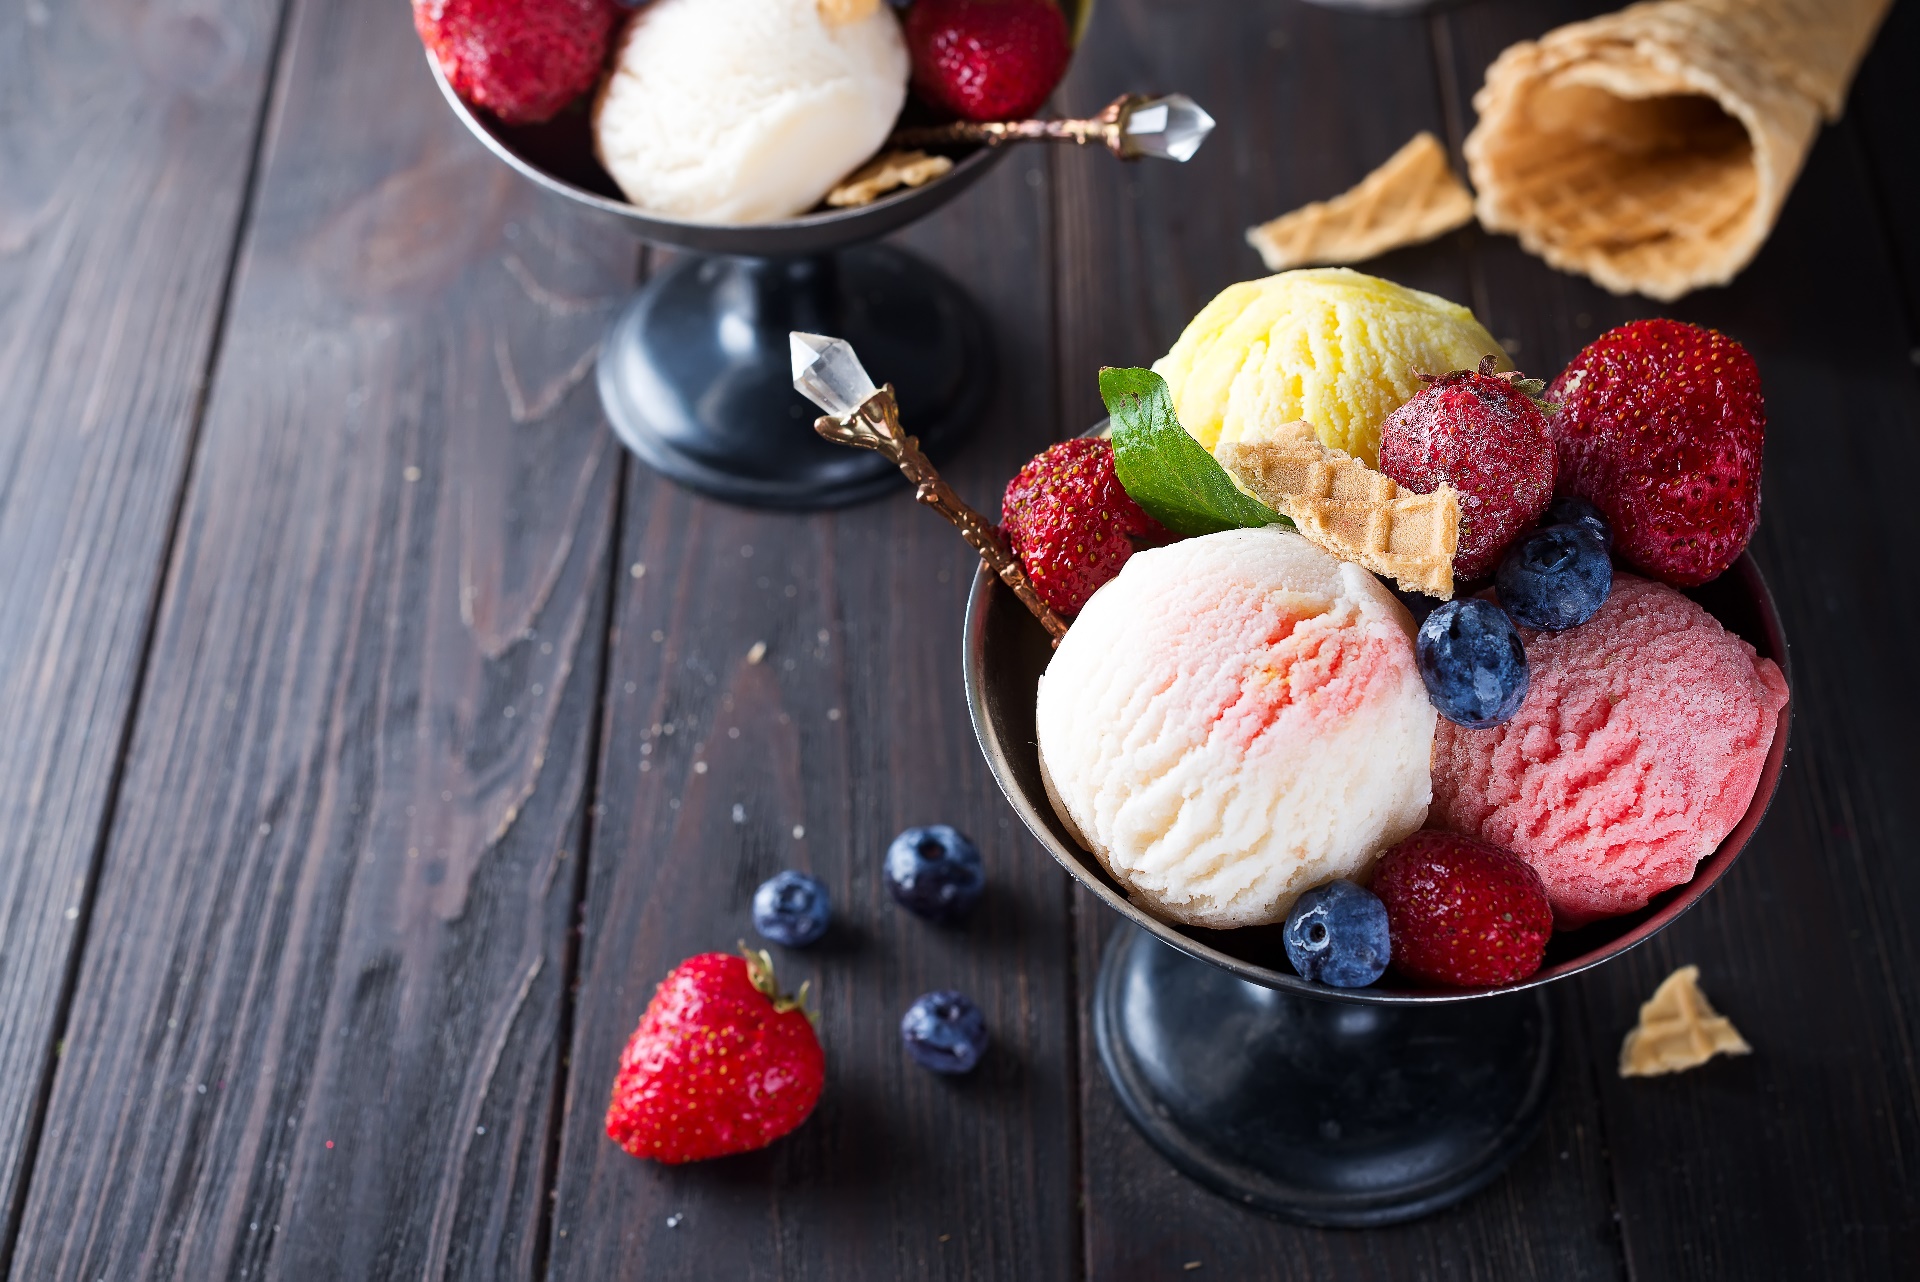 Sweets Fruit Food Waffle Ice Cream Blueberries Strawberries Raspberries Mint Leaves Wooden Surface I 1920x1282